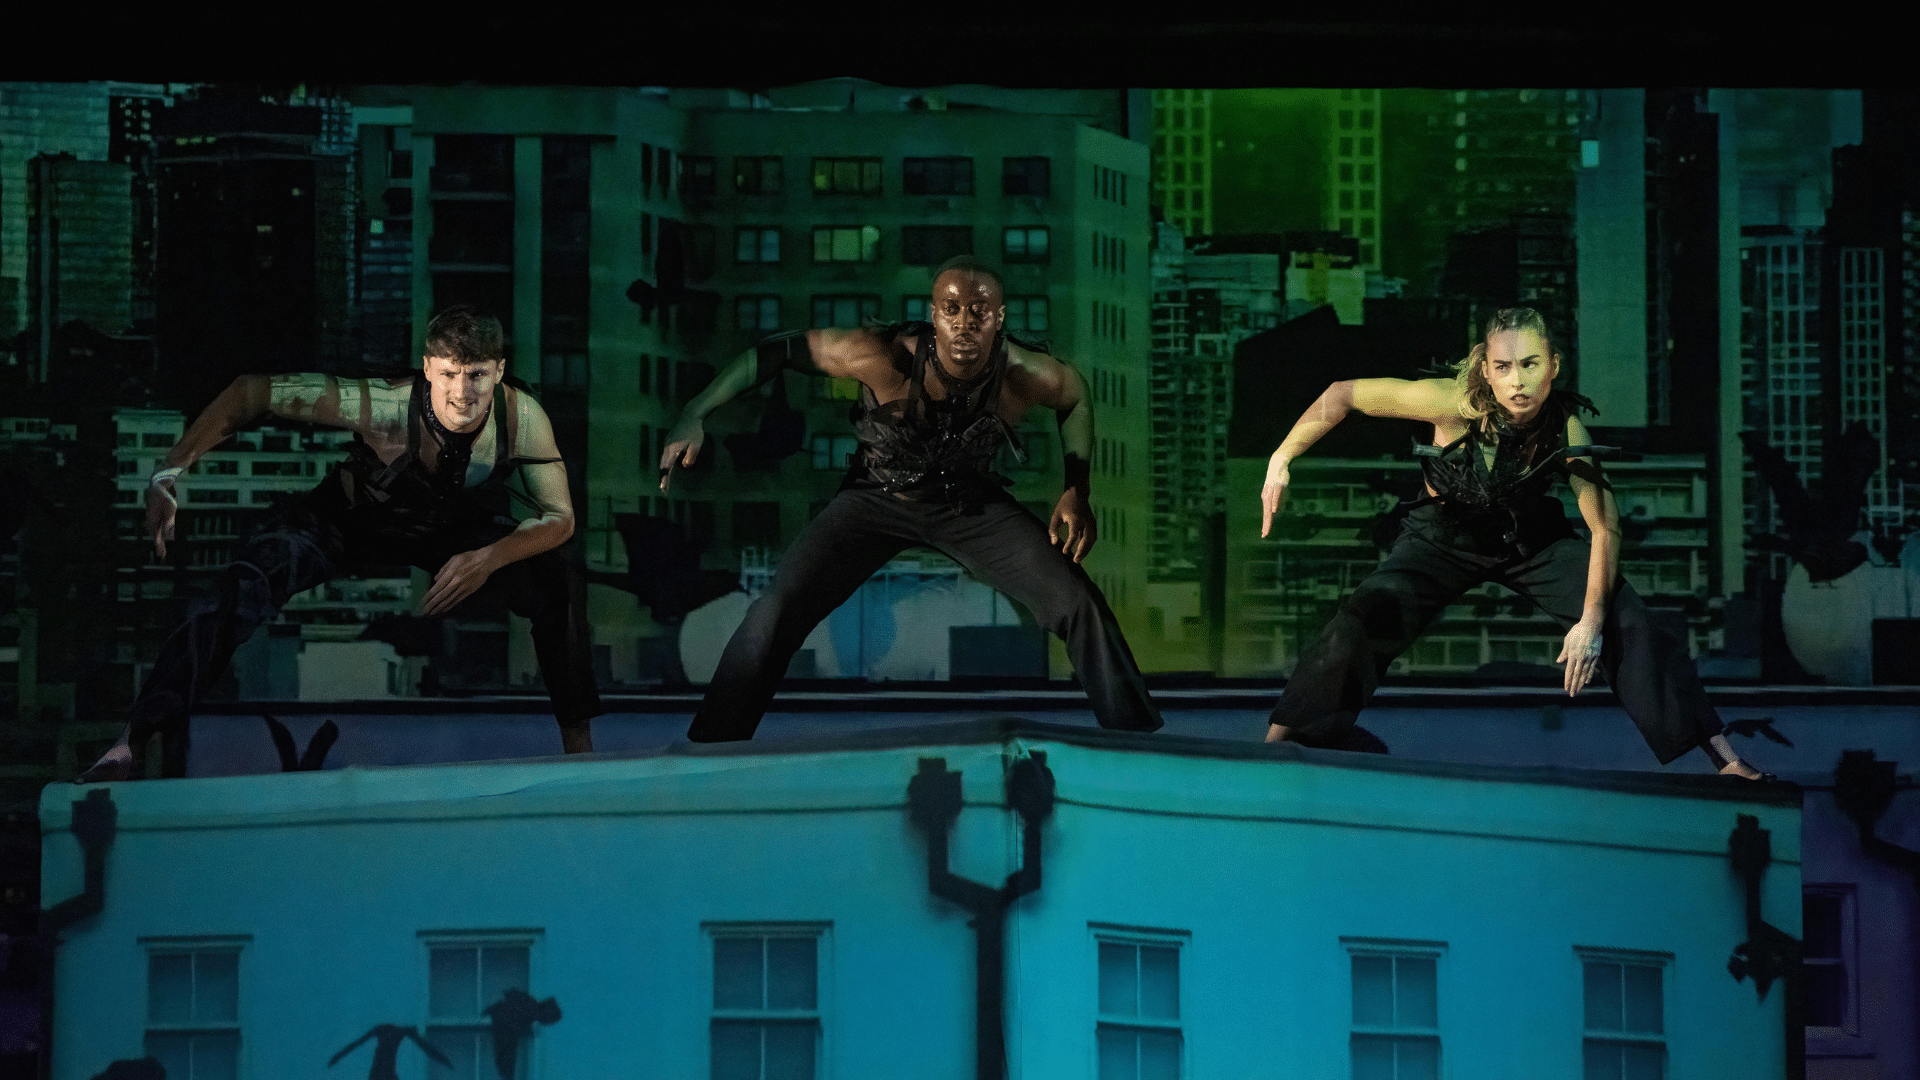 Nobody production photo: three performers dressed in black crouch side-by-side on a platform in an urban landscape on stage.